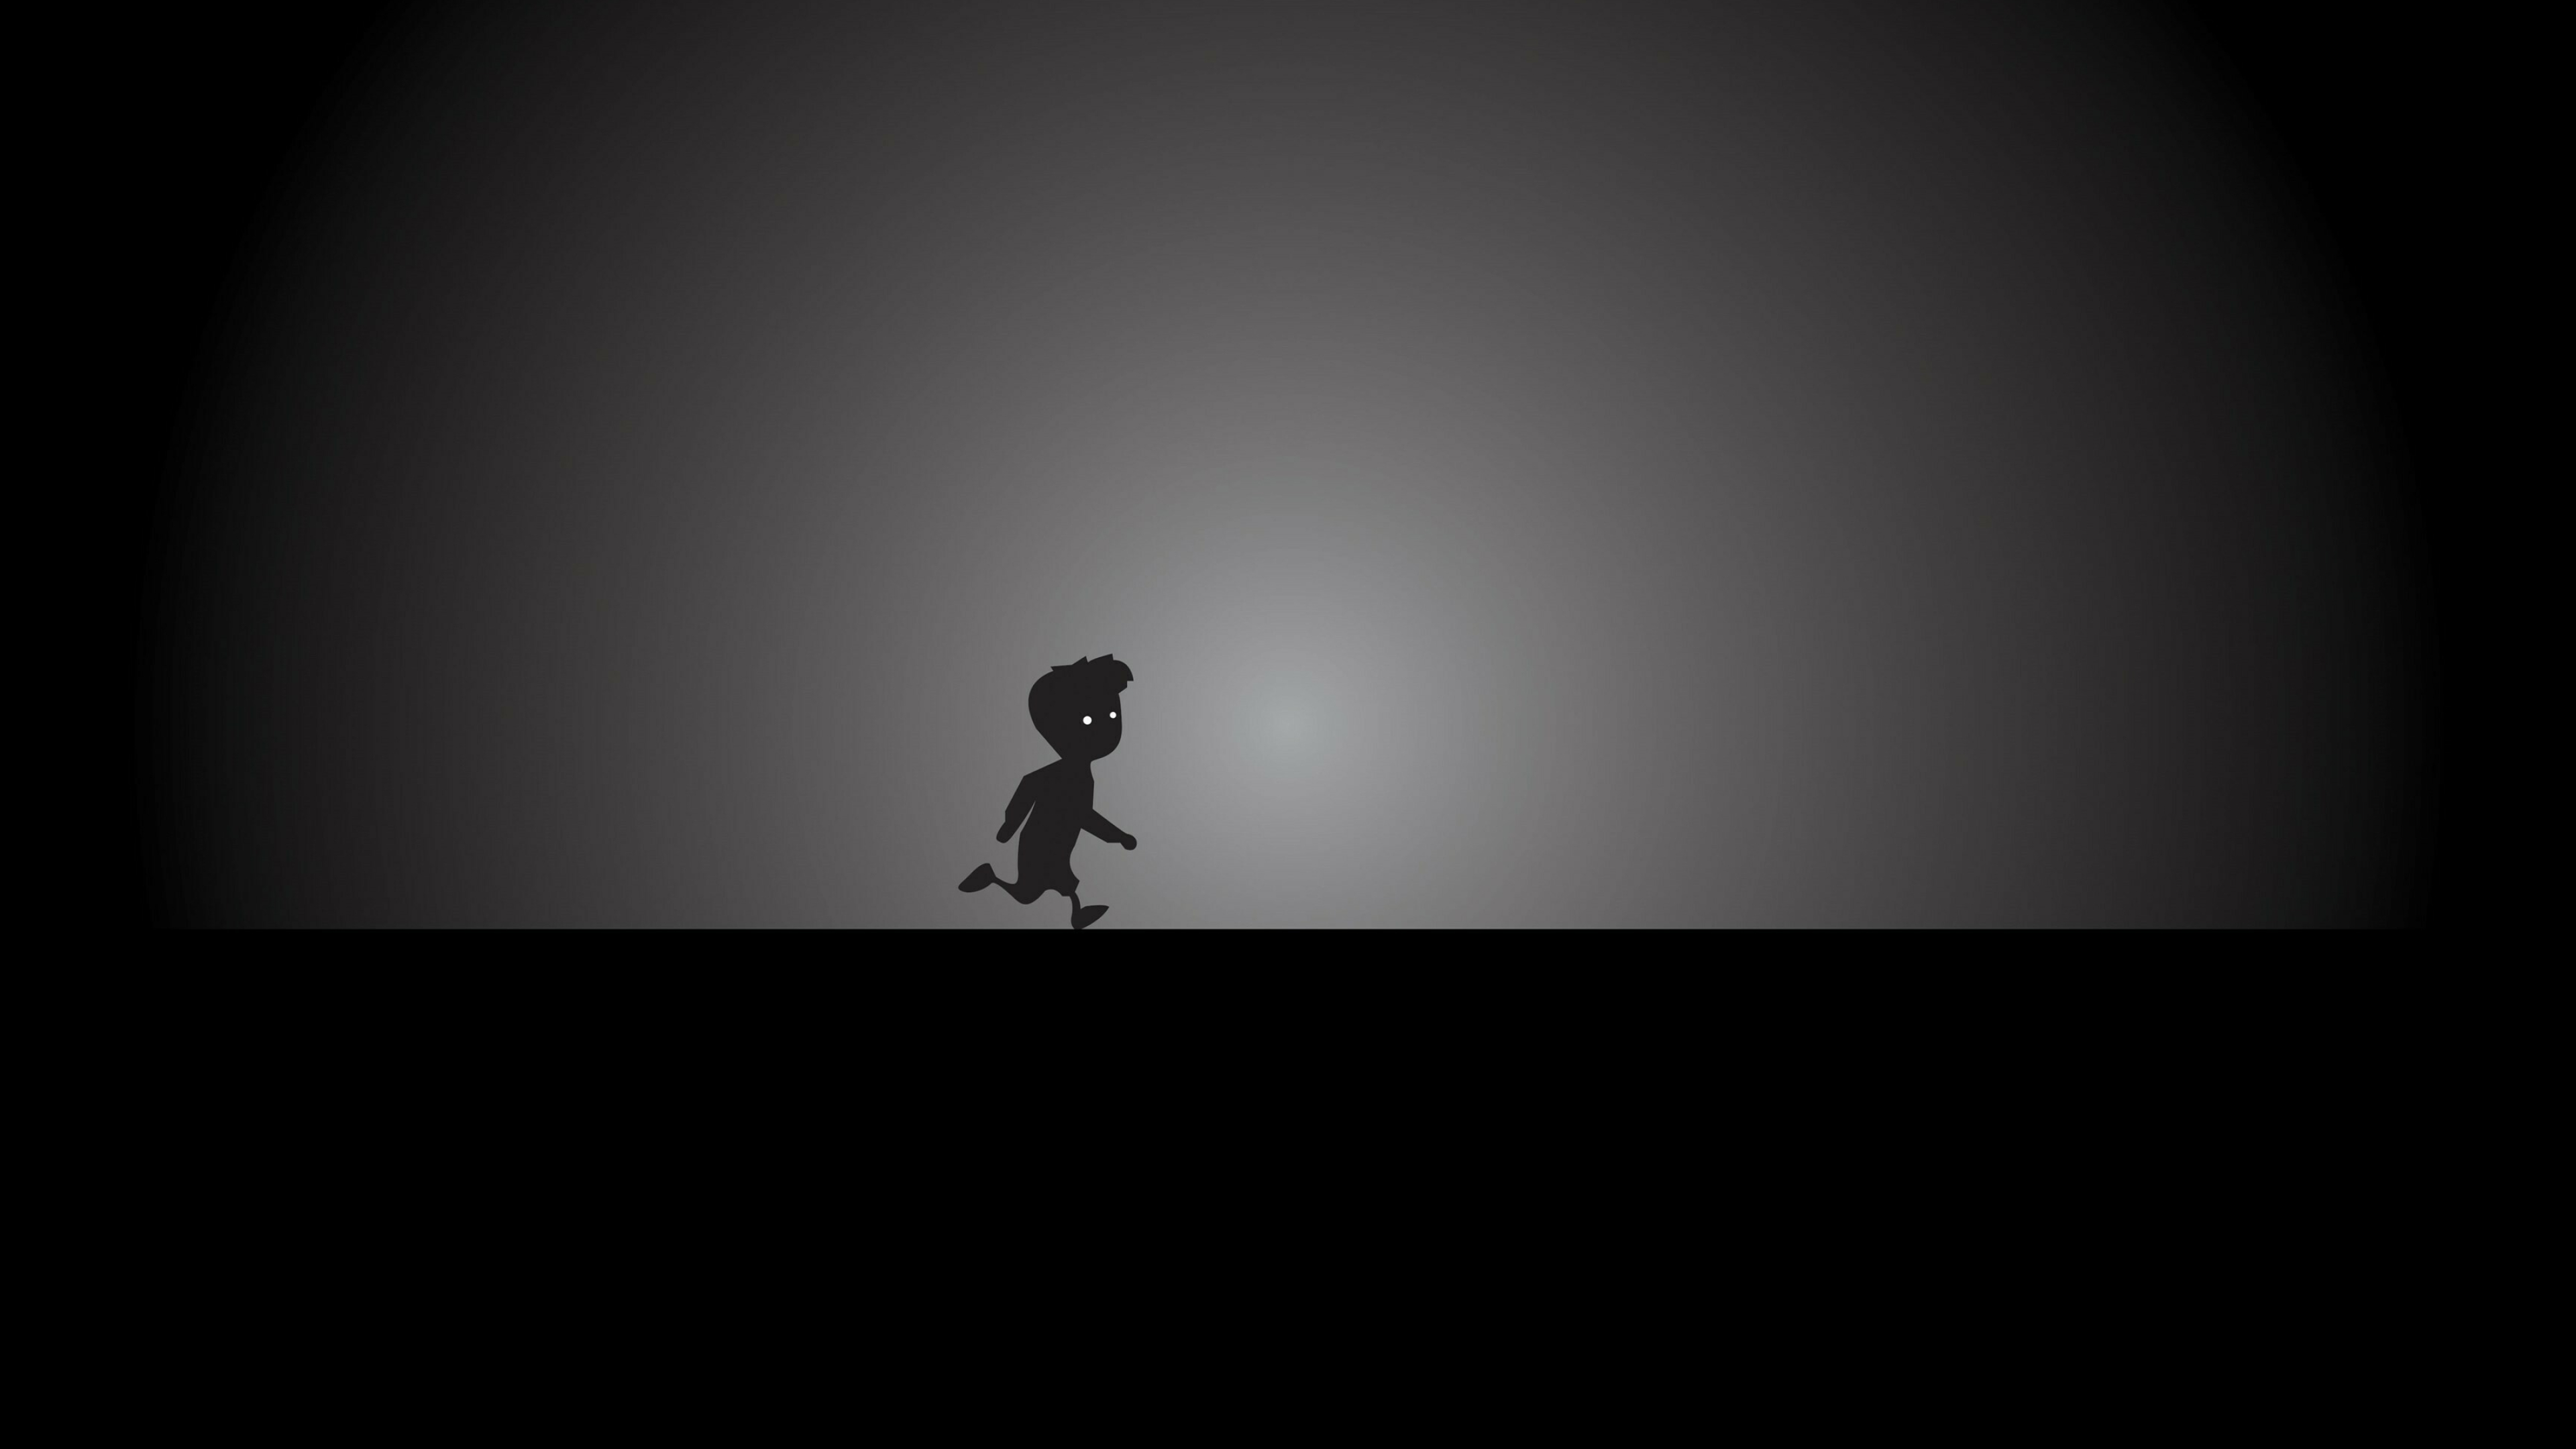 Limbo: A puzzler originally published by Microsoft Game Studios for the Xbox 360. 3840x2160 4K Wallpaper.